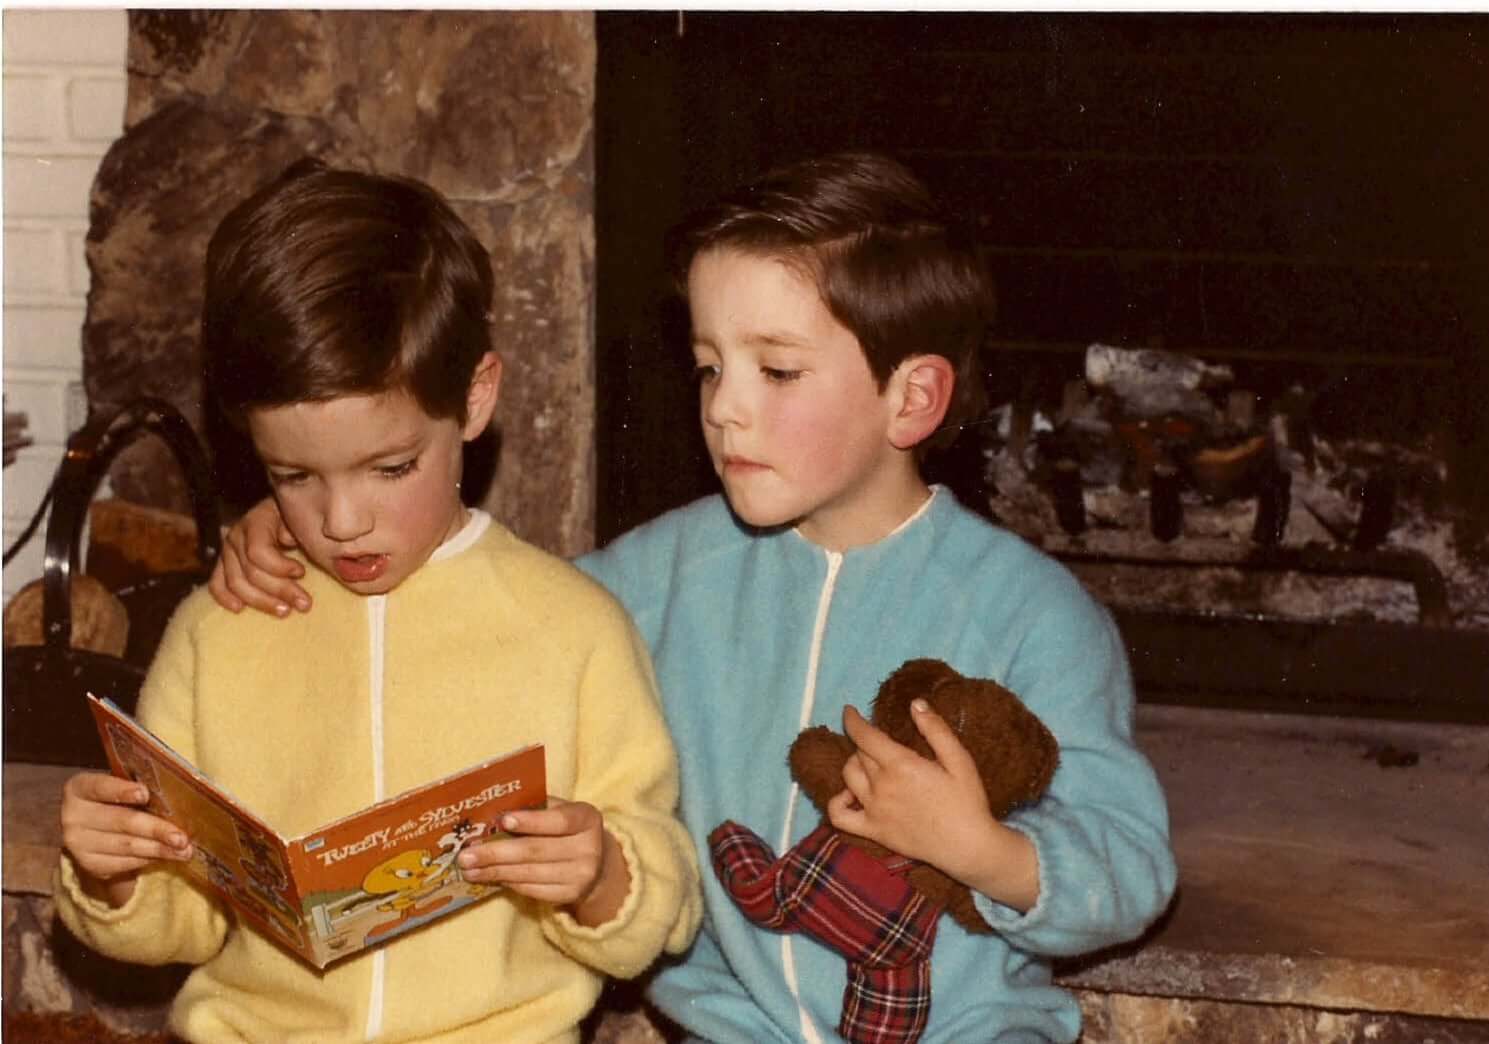 Young Drew and Jonathan read a picture book together